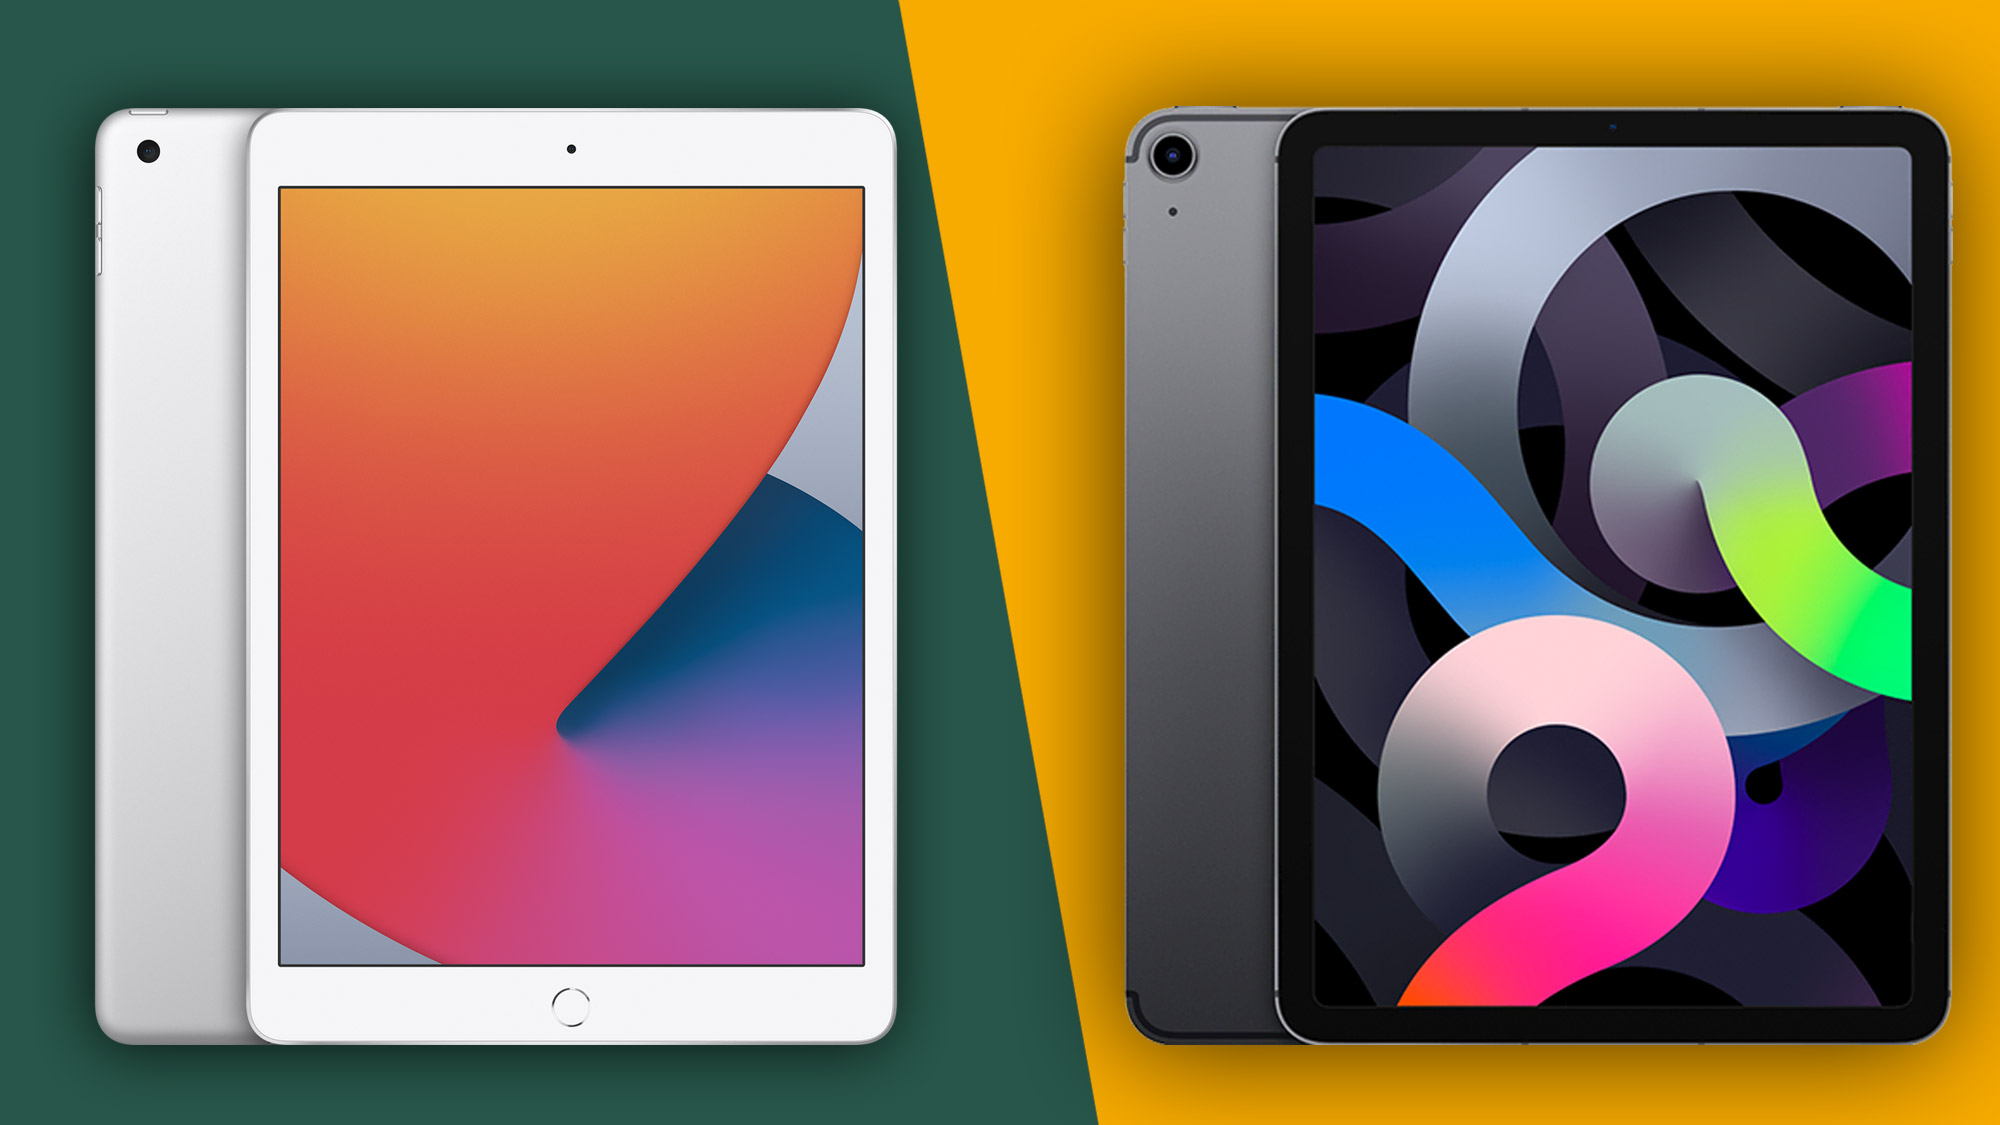 iPad (2020) vs iPad Air 4: which Apple tablet is made for you